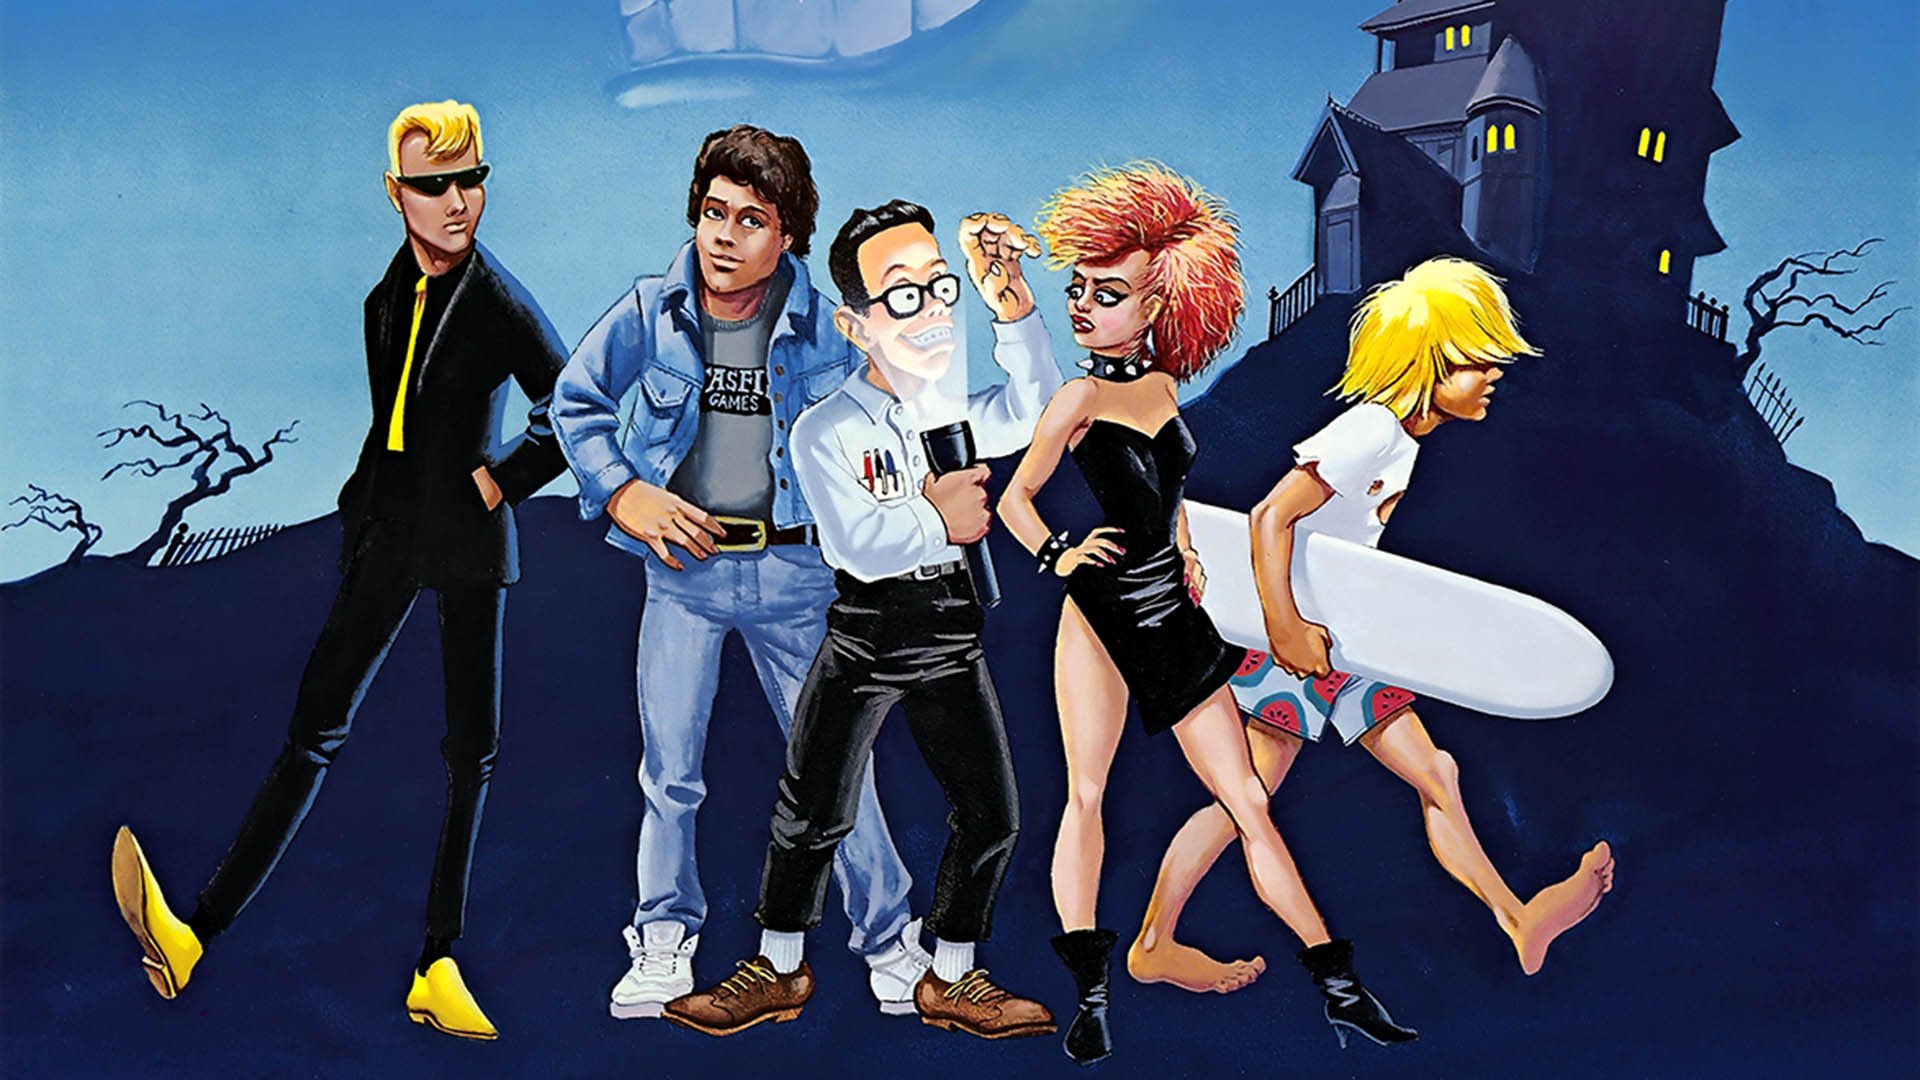 Maniac Mansion could return with a new installment